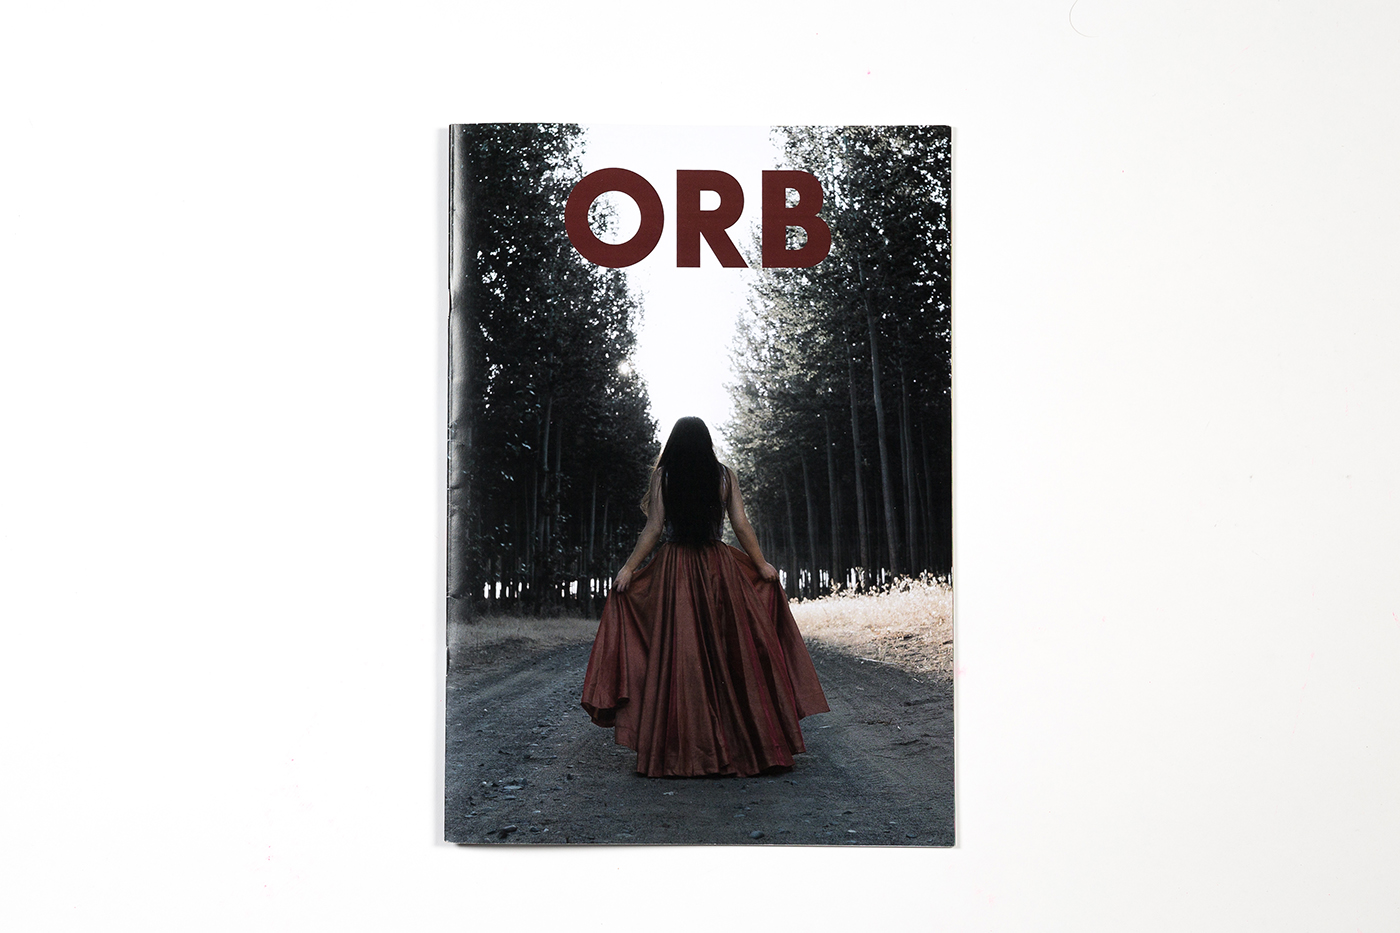 Ruth Robertson The launch of ORB magazine2